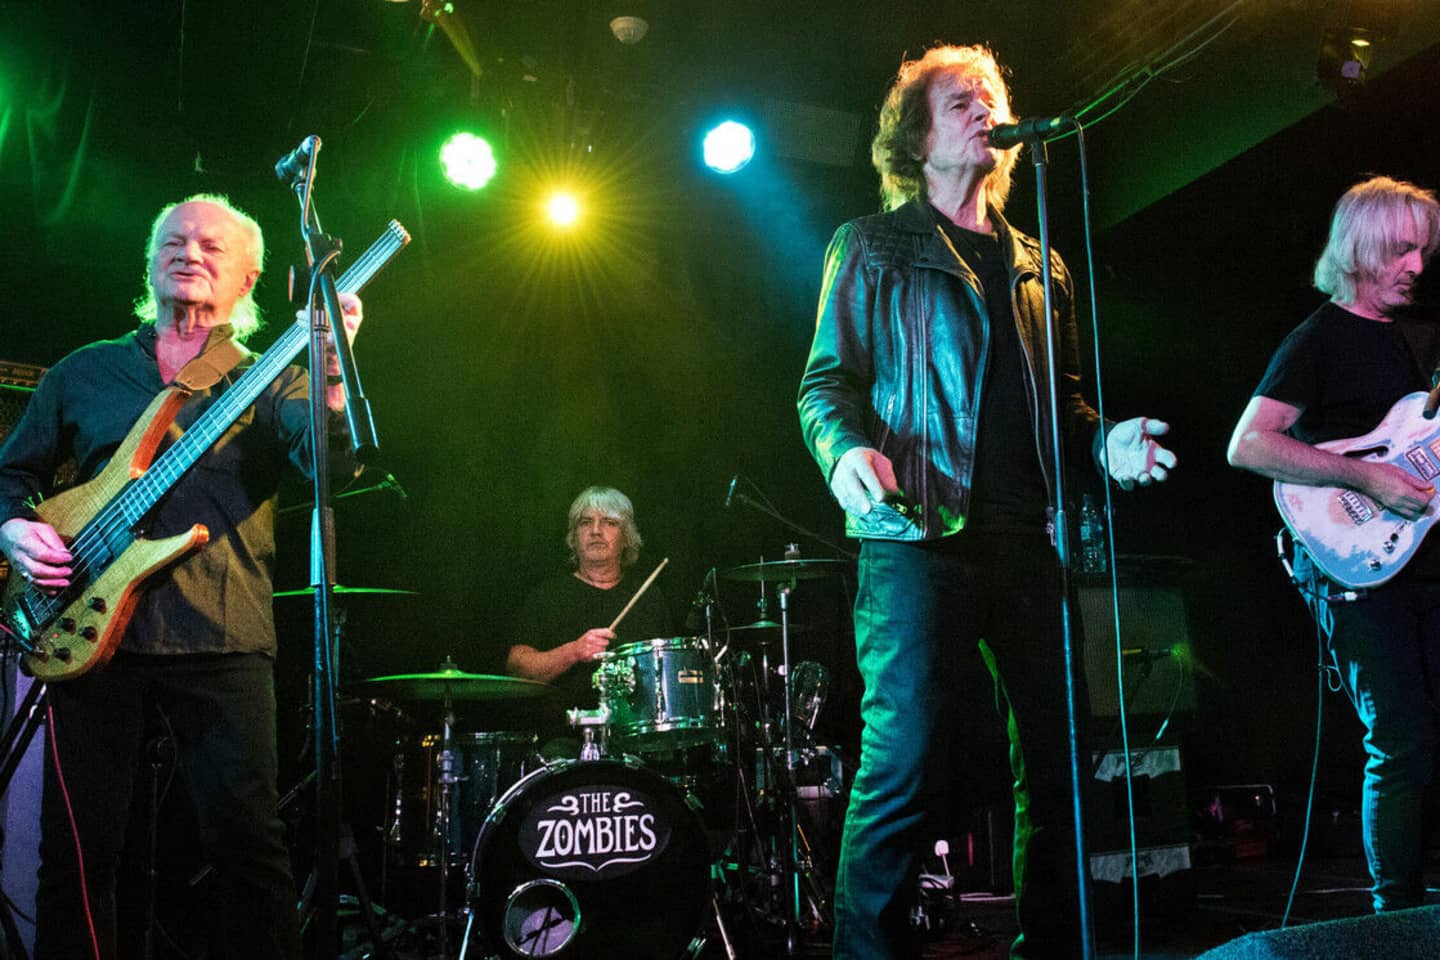 The Zombies Tickets The Zombies Tour and Concert Tickets viagogo